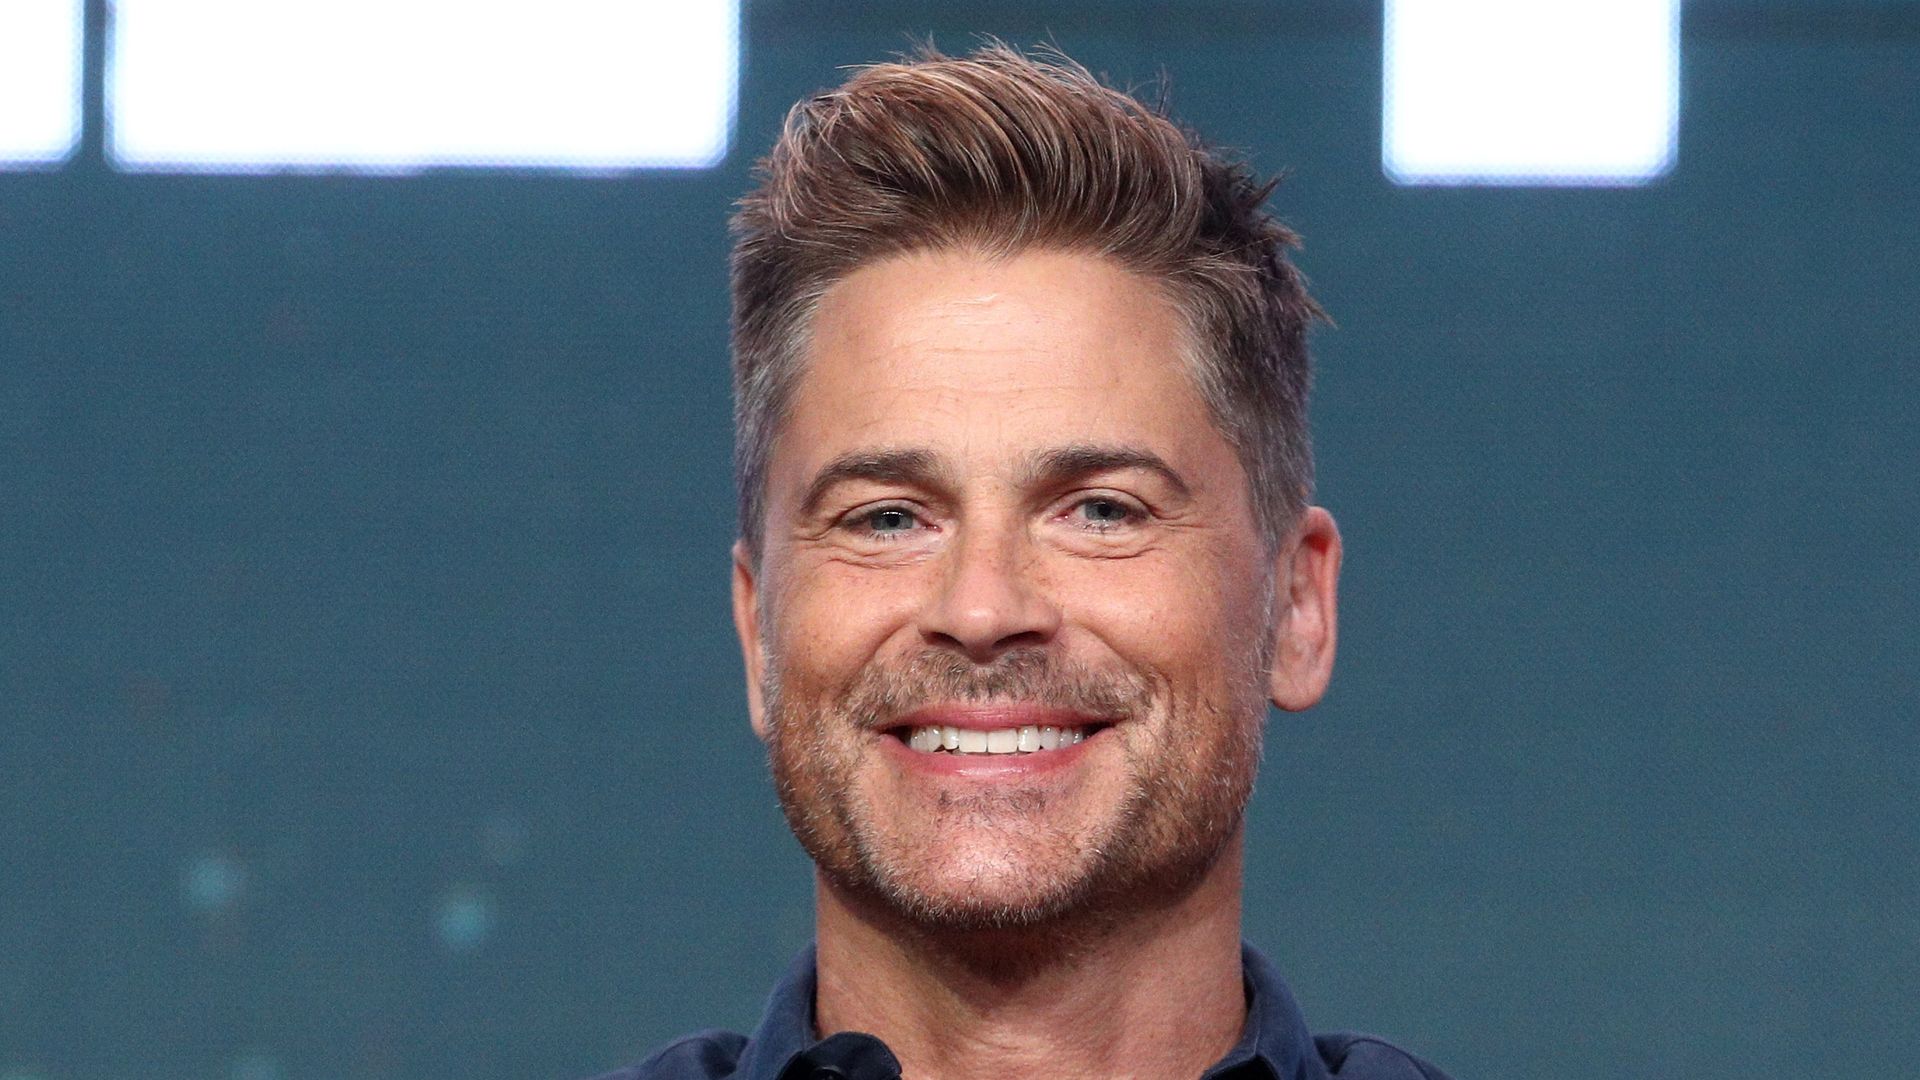 Executive producer Rob Lowe of 'The Lowe Files ' speaks onstage during the A+E  portion of the 2017 Summer Television Critics Association Press Tour at The Beverly Hilton Hotel on July 28, 2017 in Beverly Hills, California.